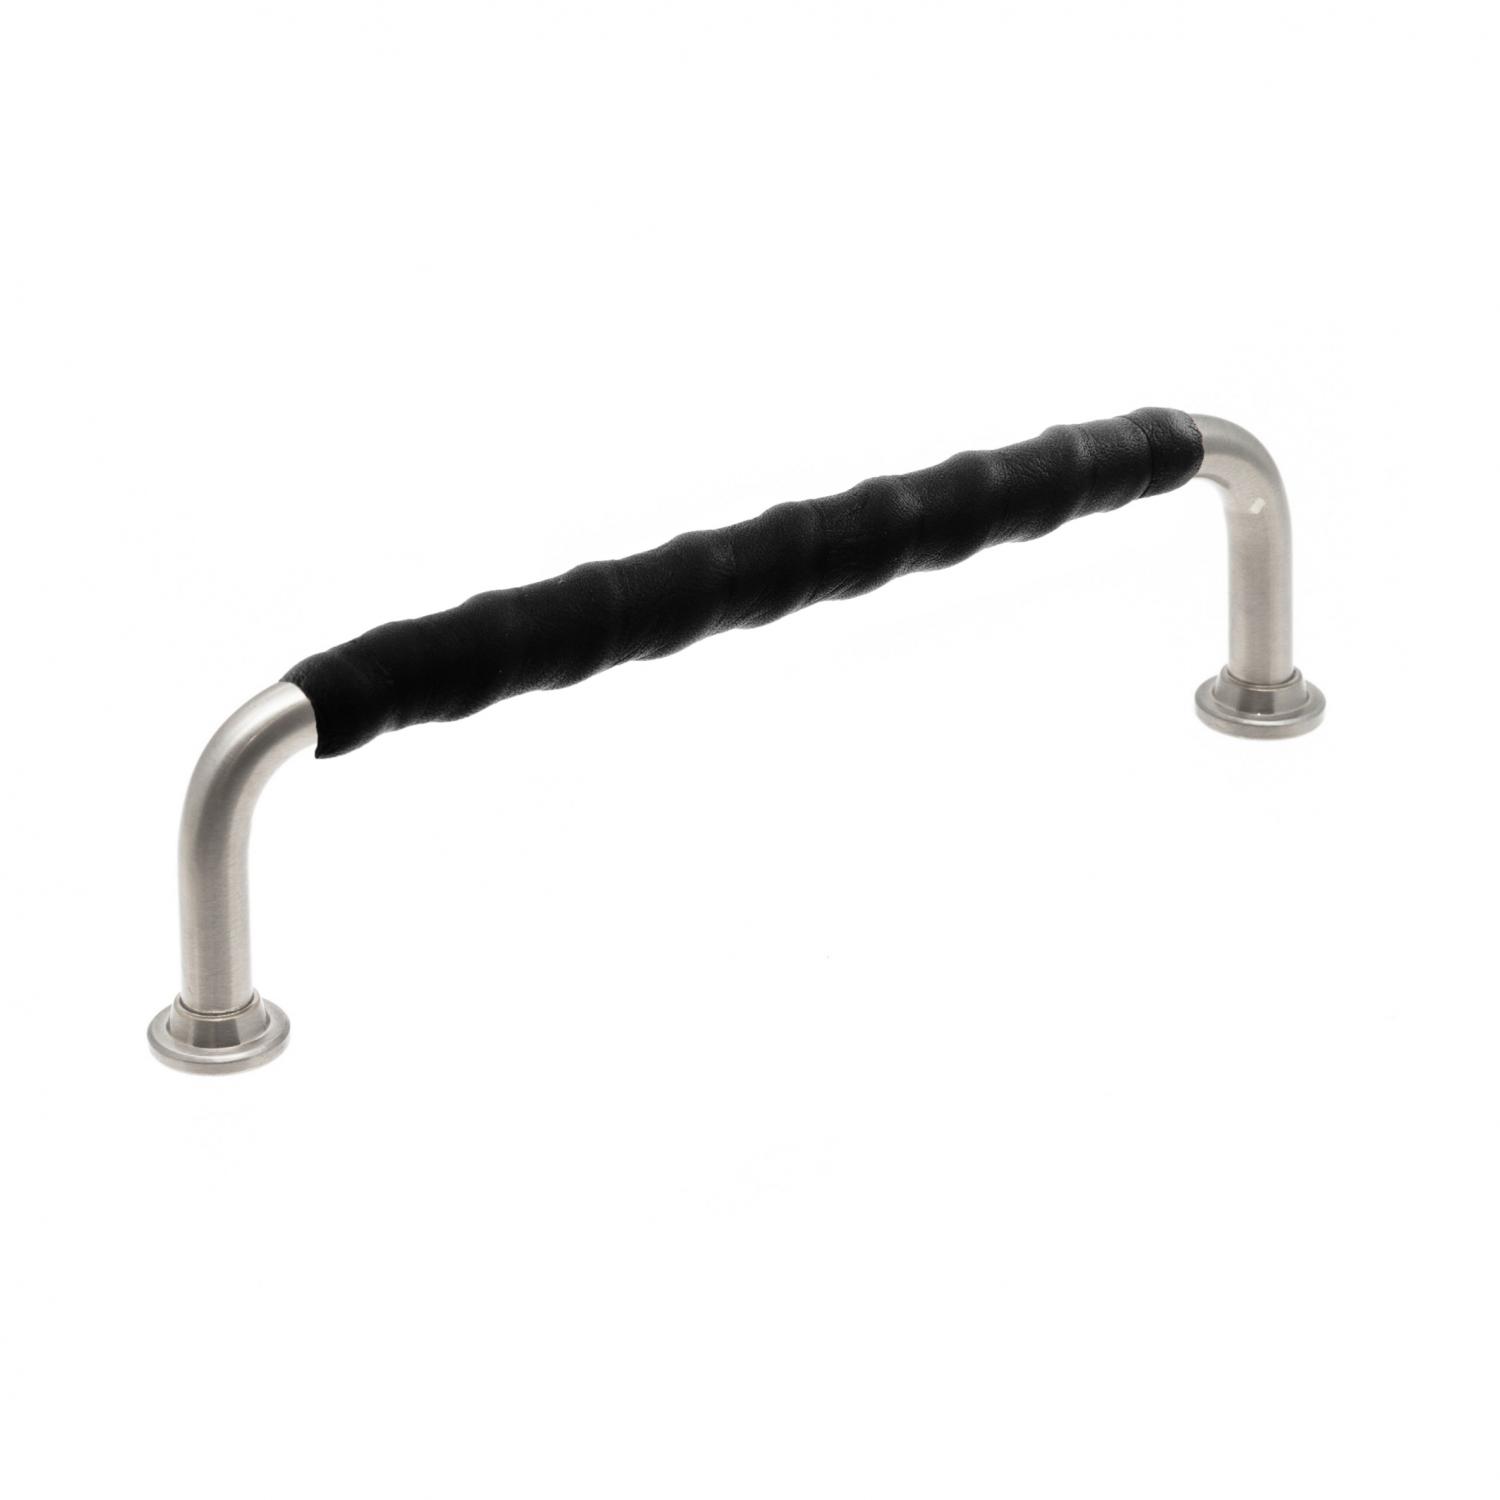 Leather-wrapped kitchen handle 1353 Stainless look & Black